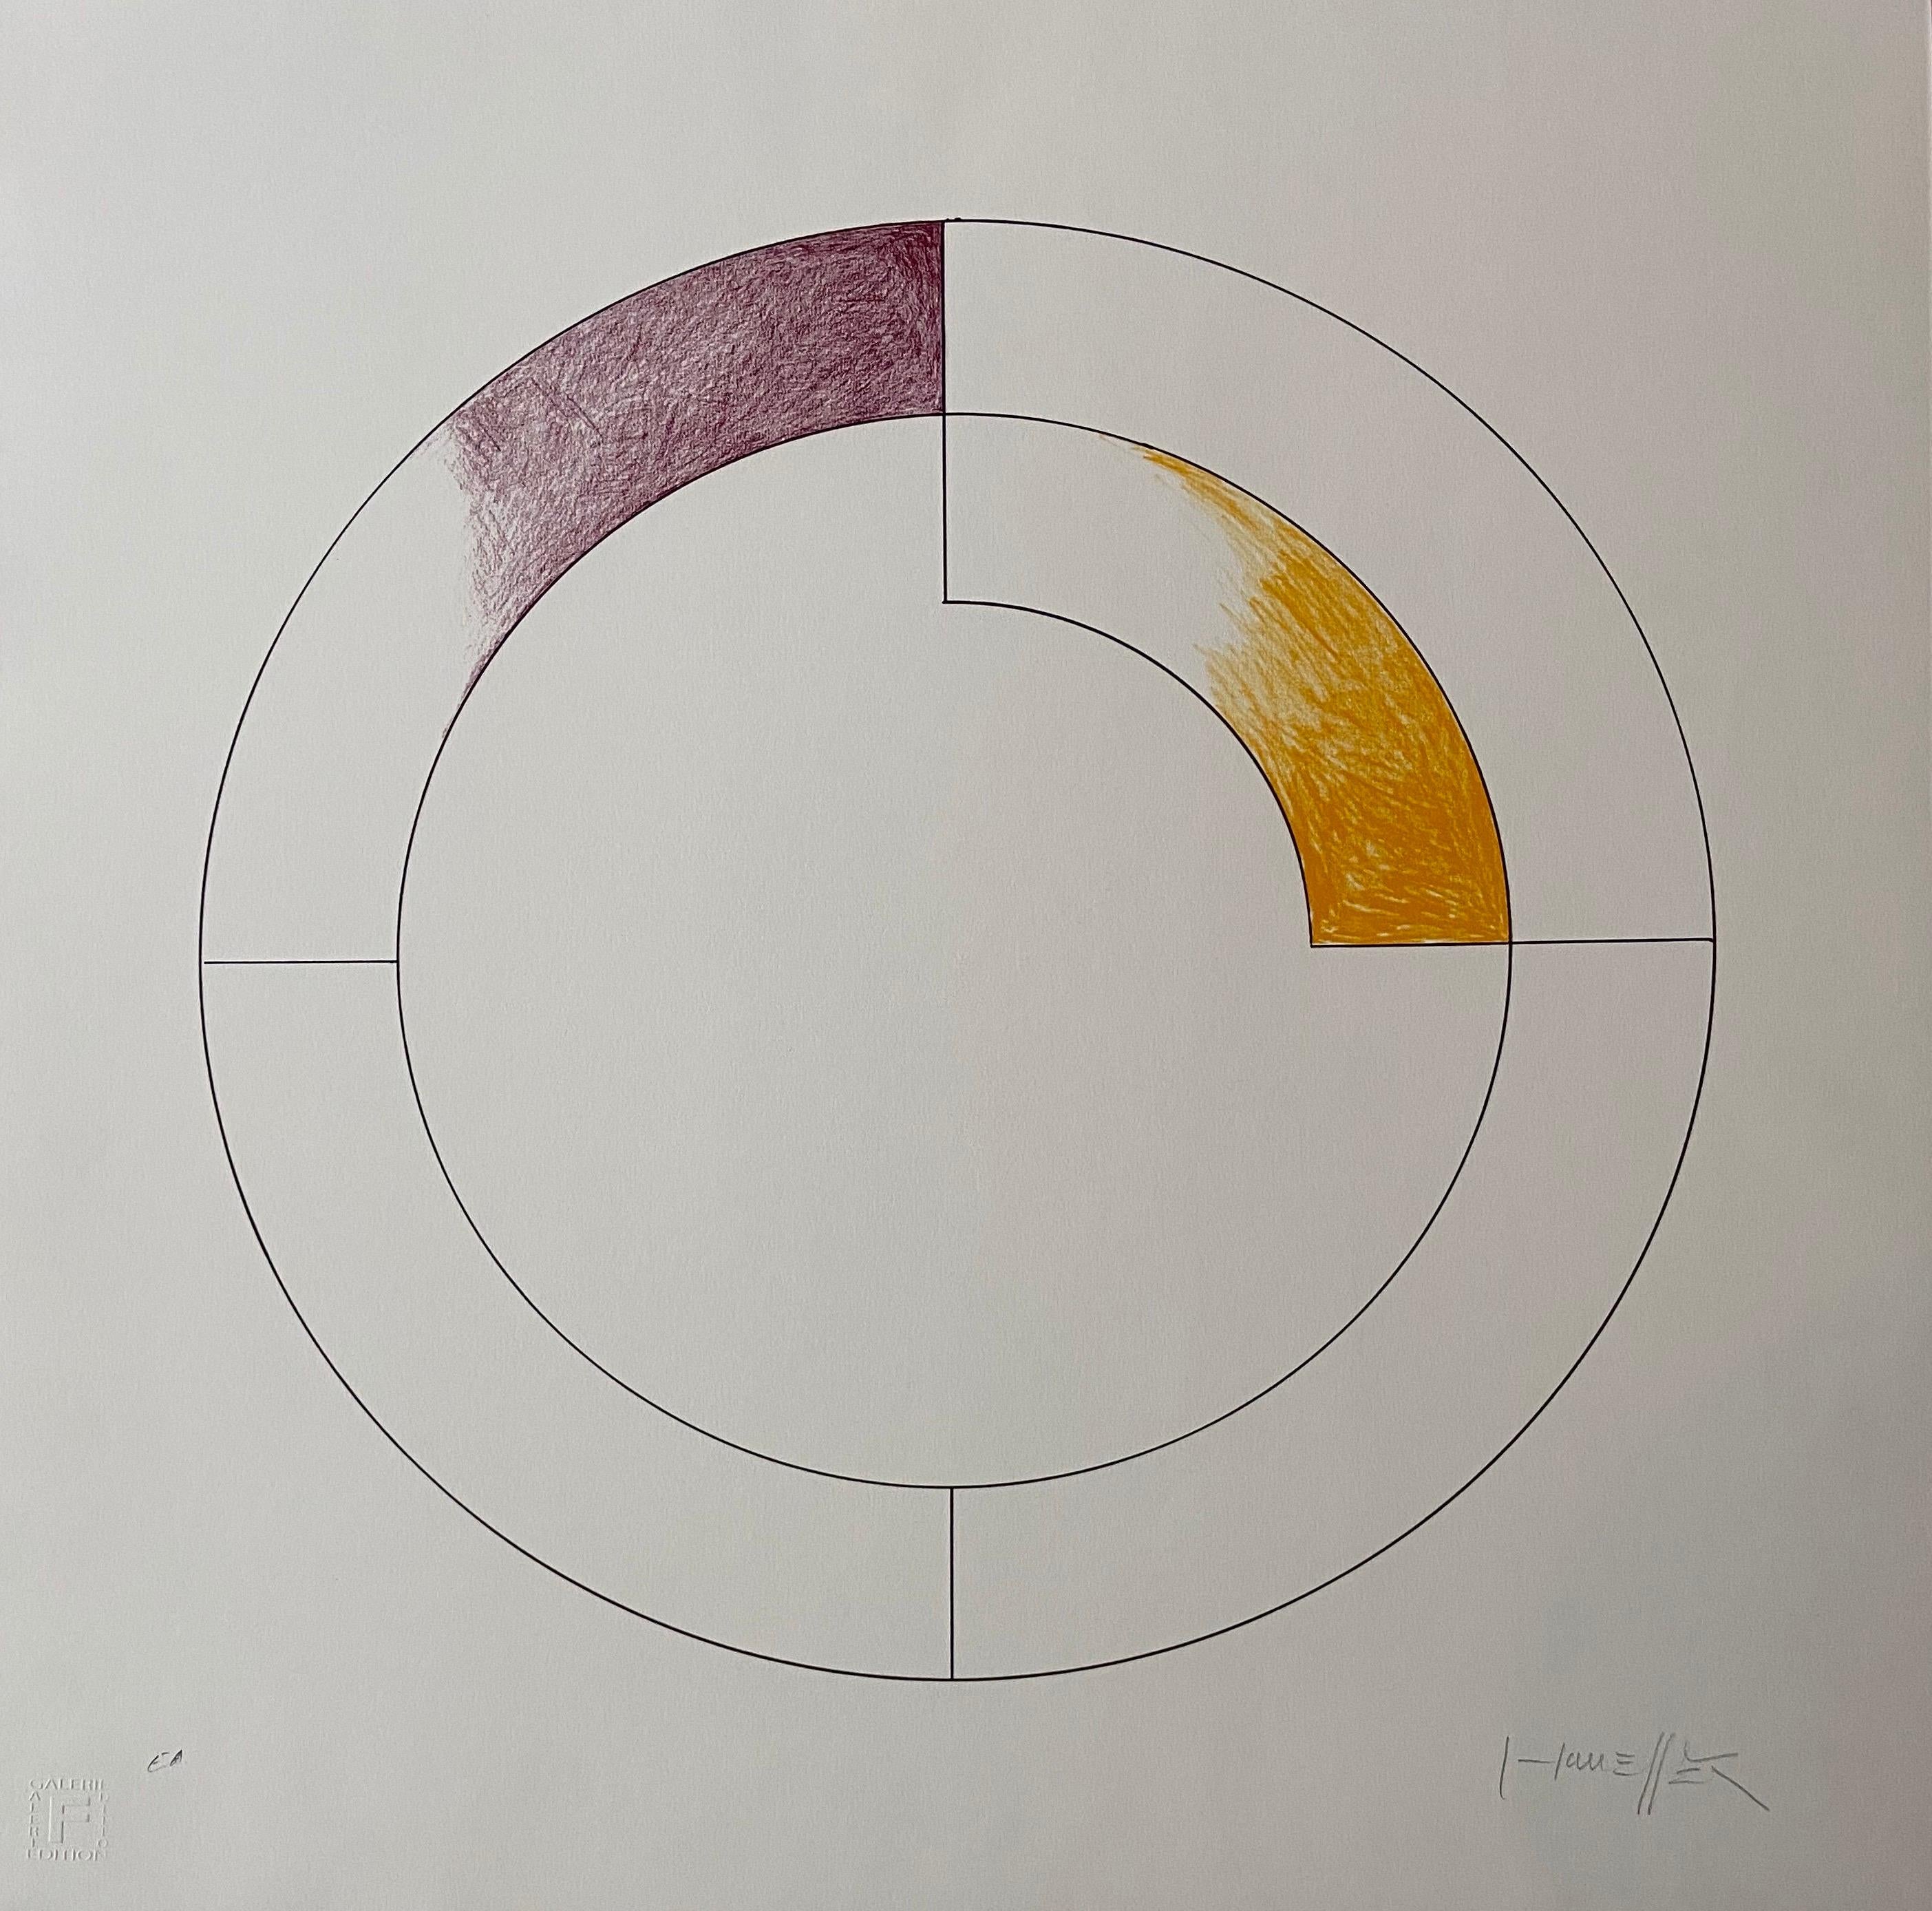 Gottfried Honegger 
Composition 3 (purple and yellow)  
2015 
Original serigraph signed in pencil.
Dry stamp of the publisher in the margin at the lower left corner.
Marked EA and signed by the artist.
Limited edition of 50 copies. 
Condition: